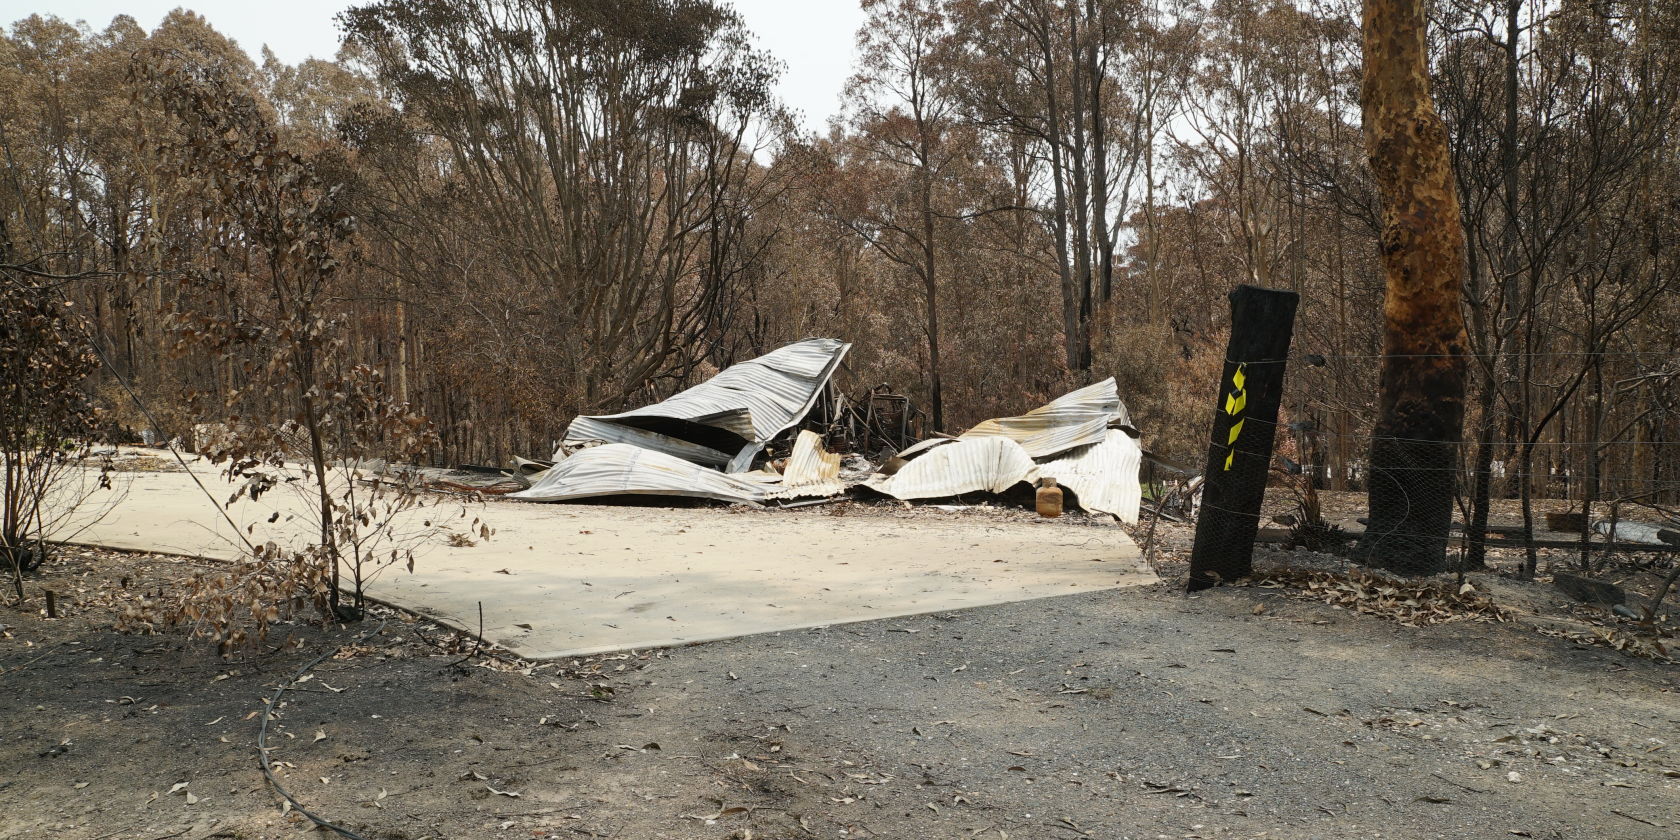 Distributing bushfire funding to the communities that need it most